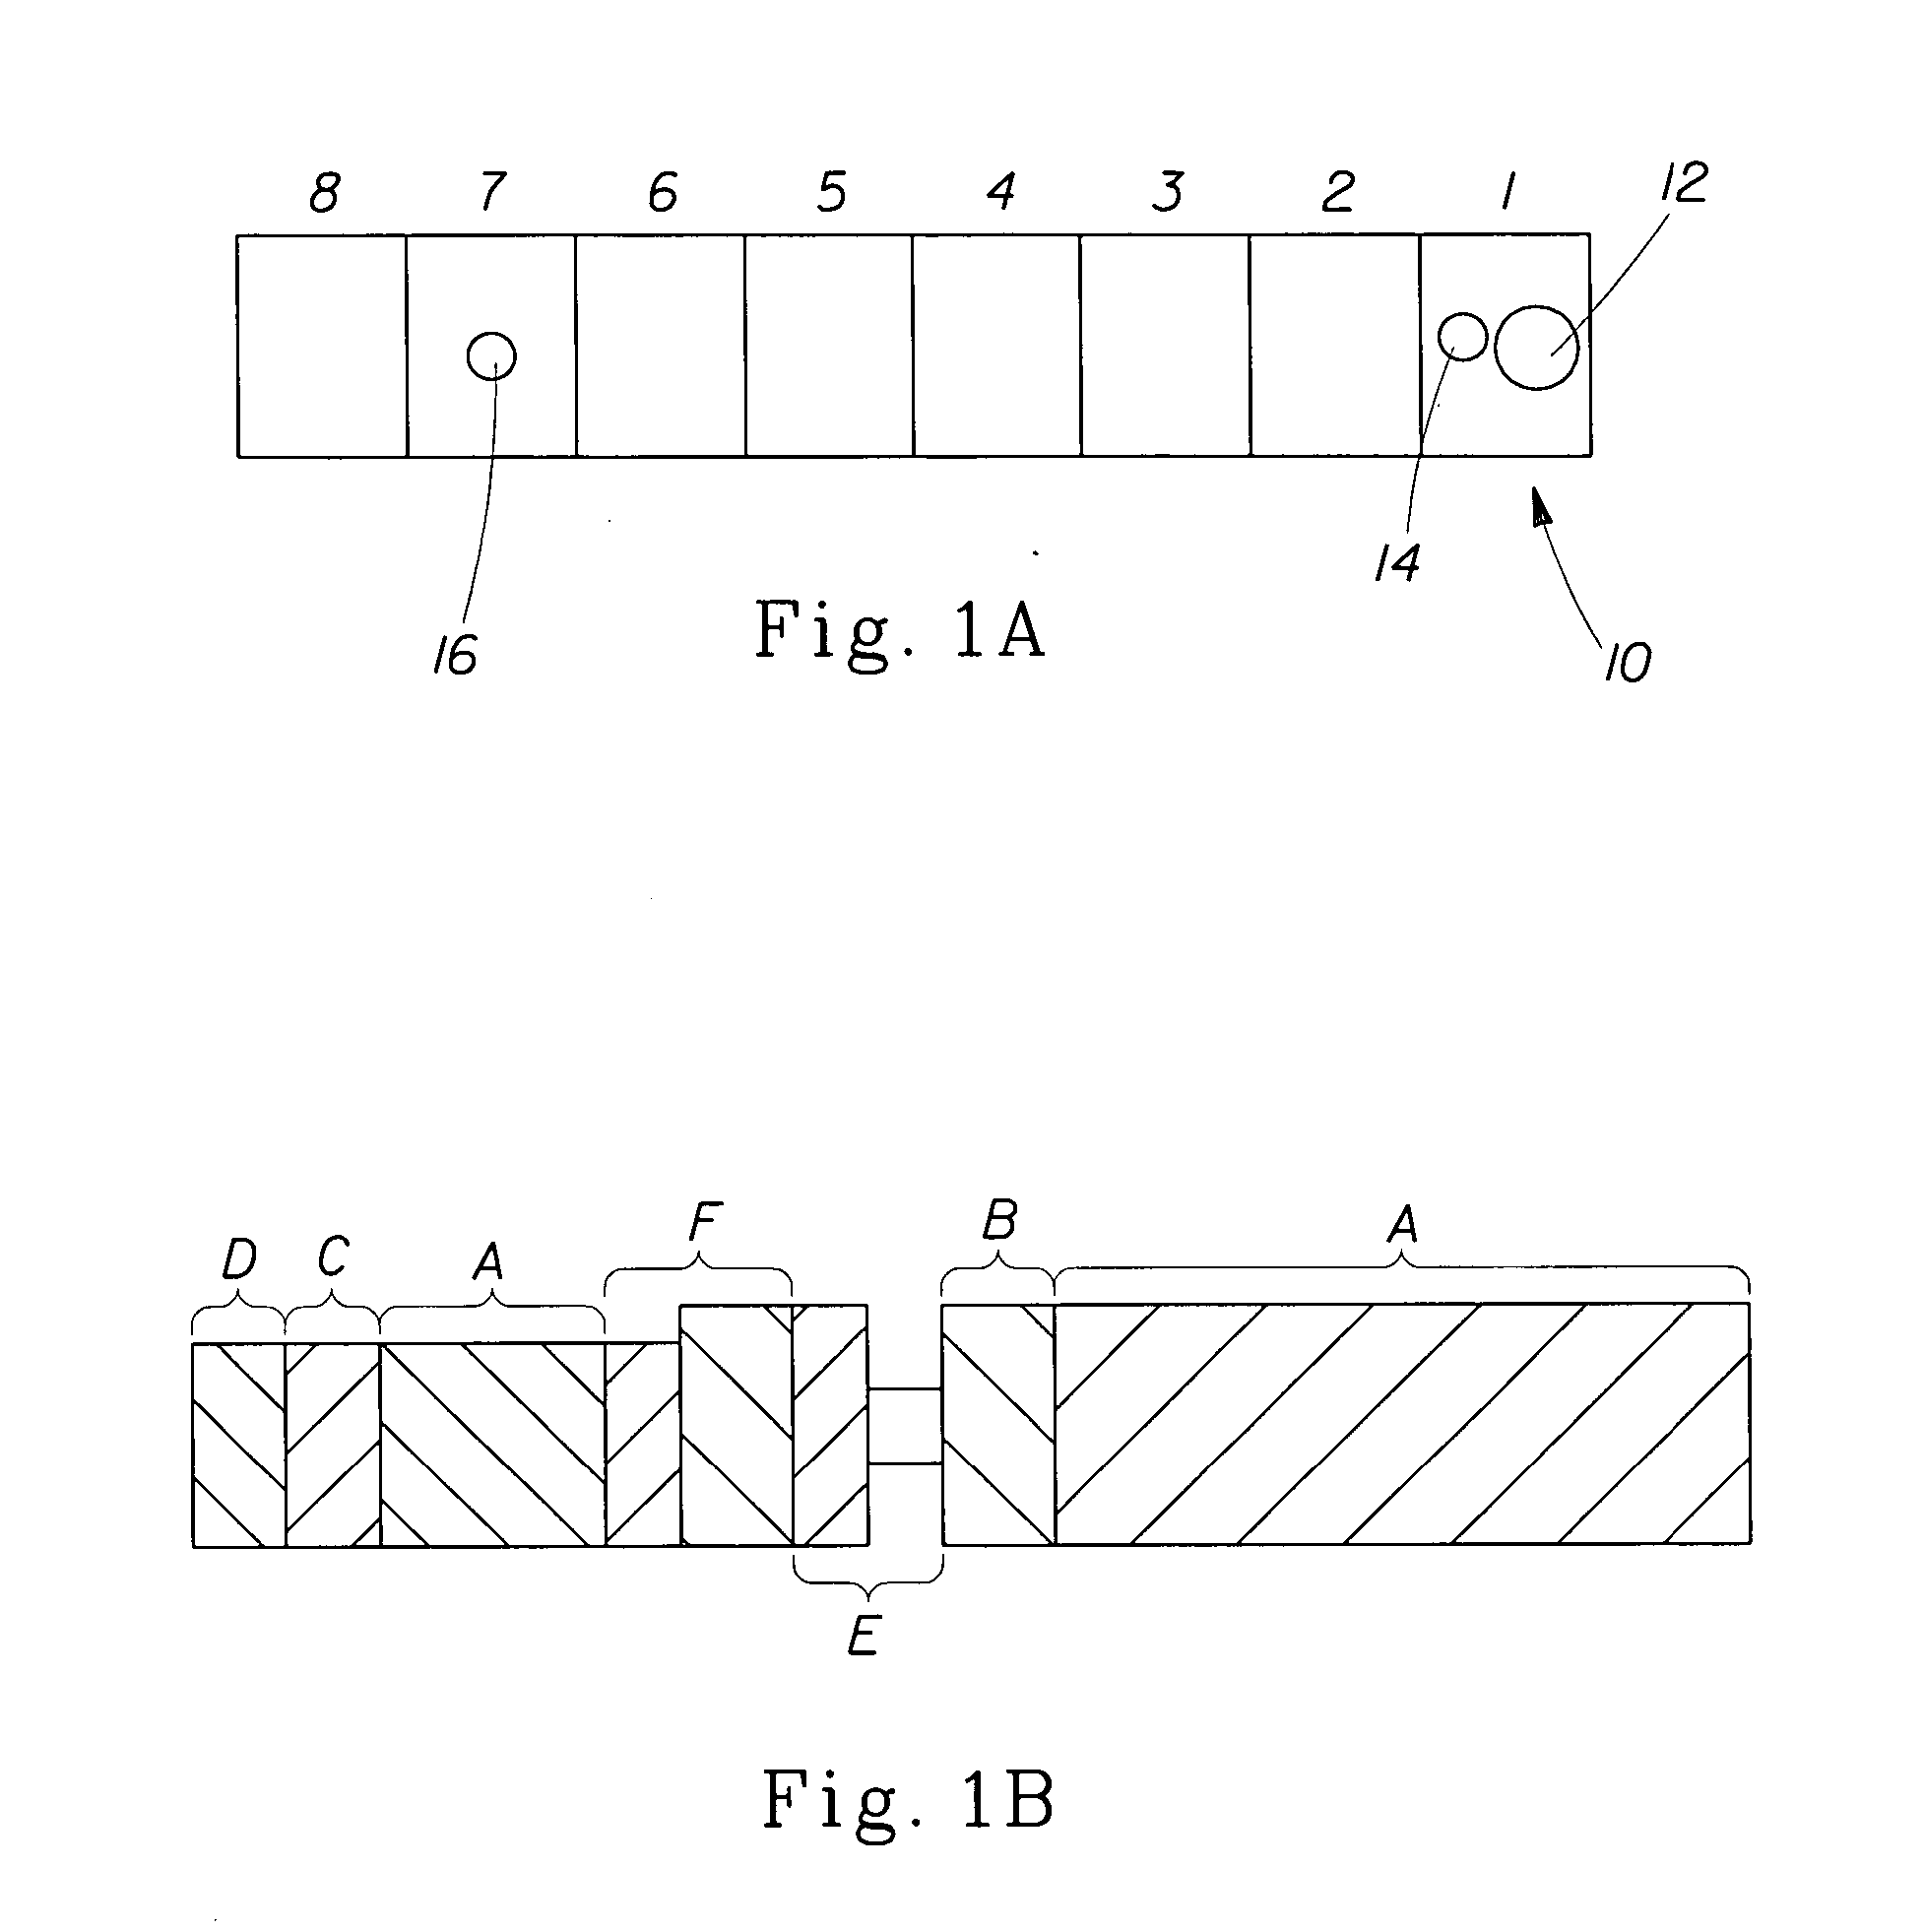 Polysaccharide structures comprising an unsubstituted polysaccharide and processes for making same